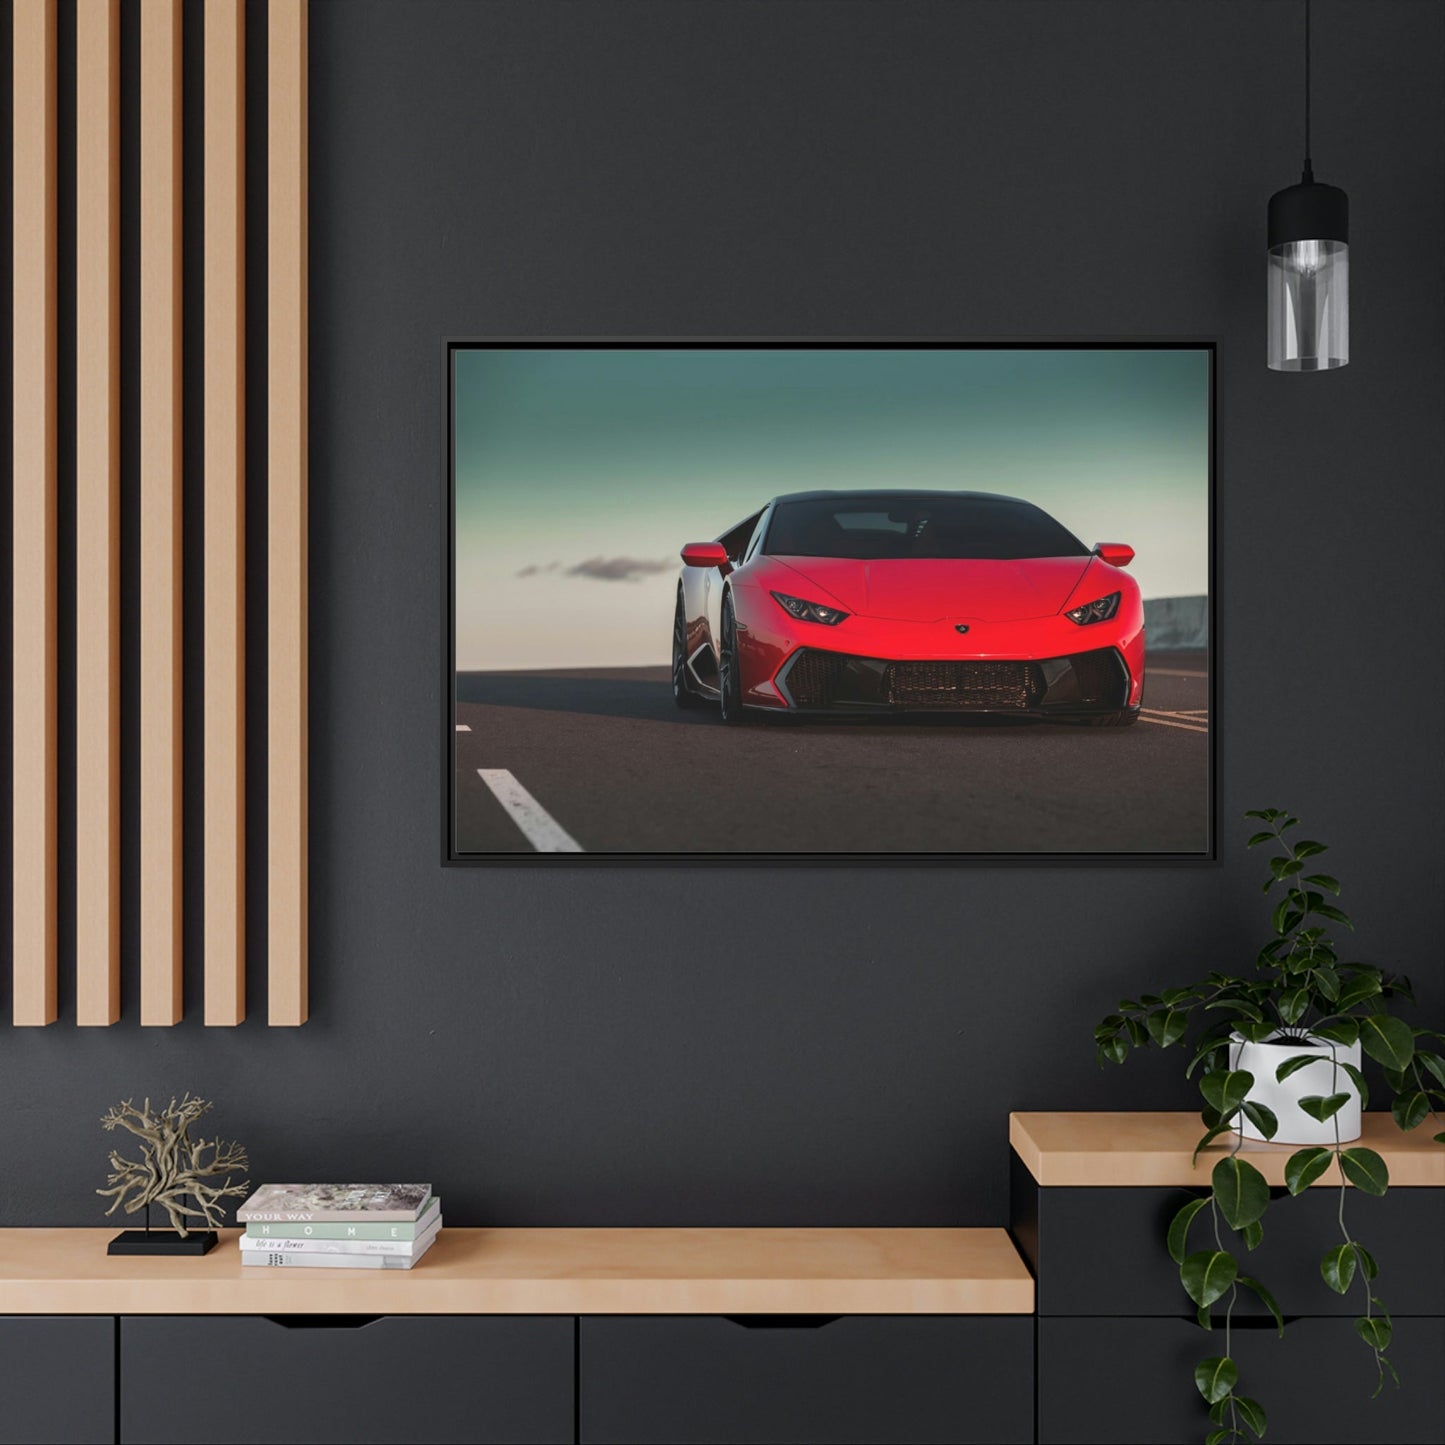 The Epitome of Style: Framed Canvas & Posters Print of a Lamborghini Supercar